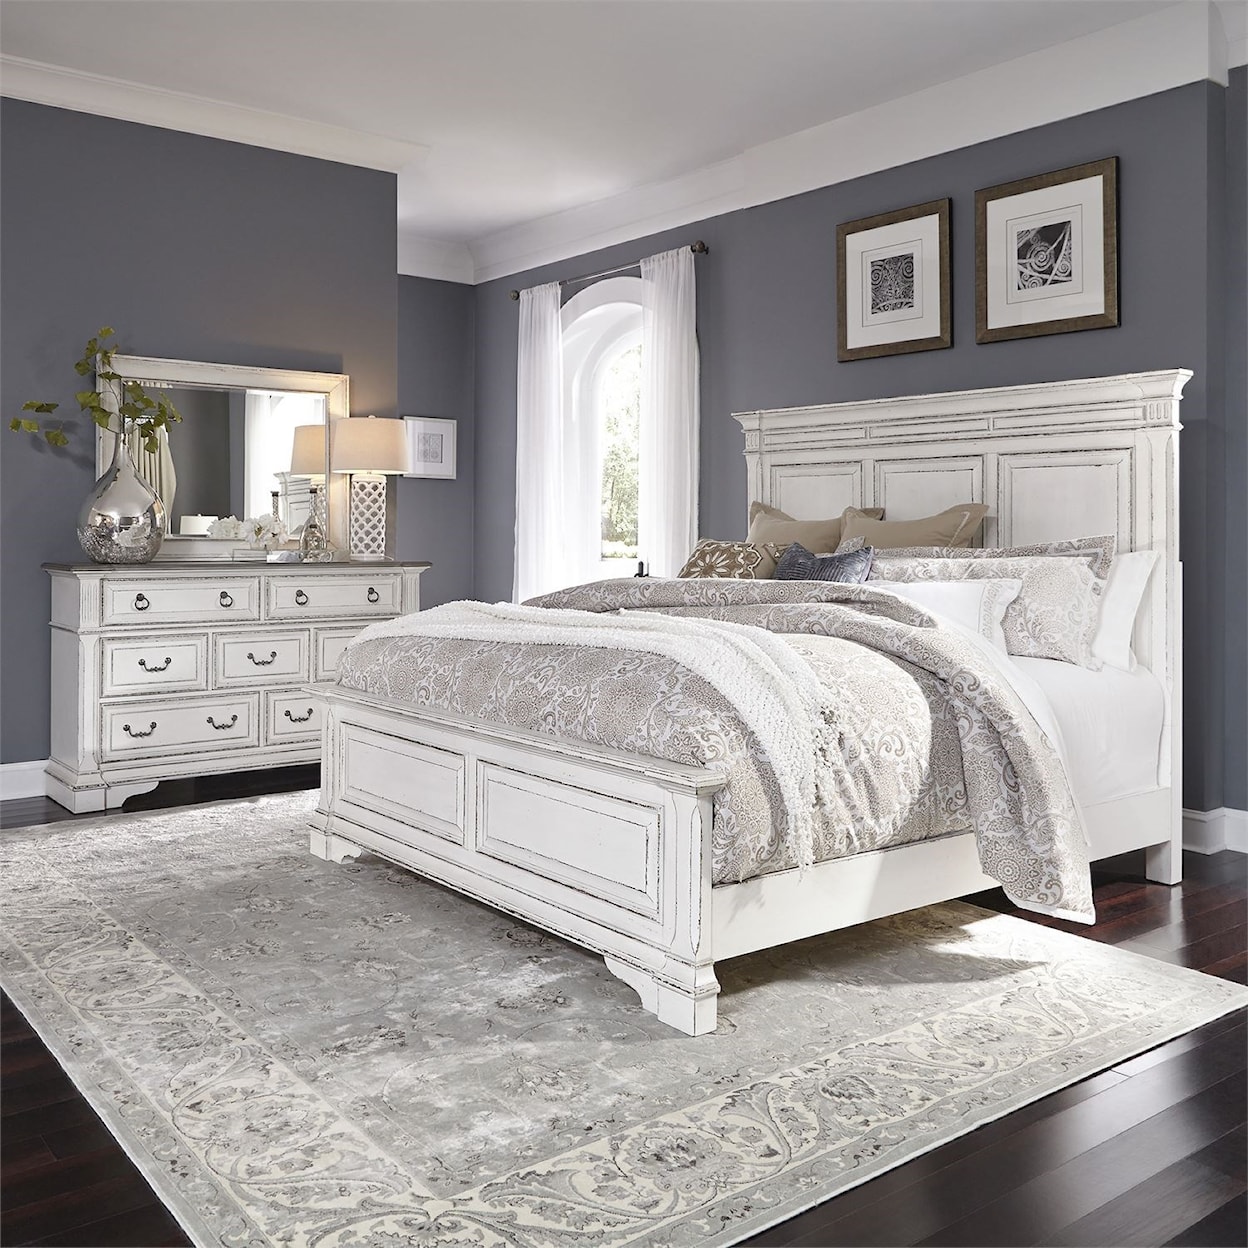 Liberty Furniture Abbey Park Queen Bedroom Group